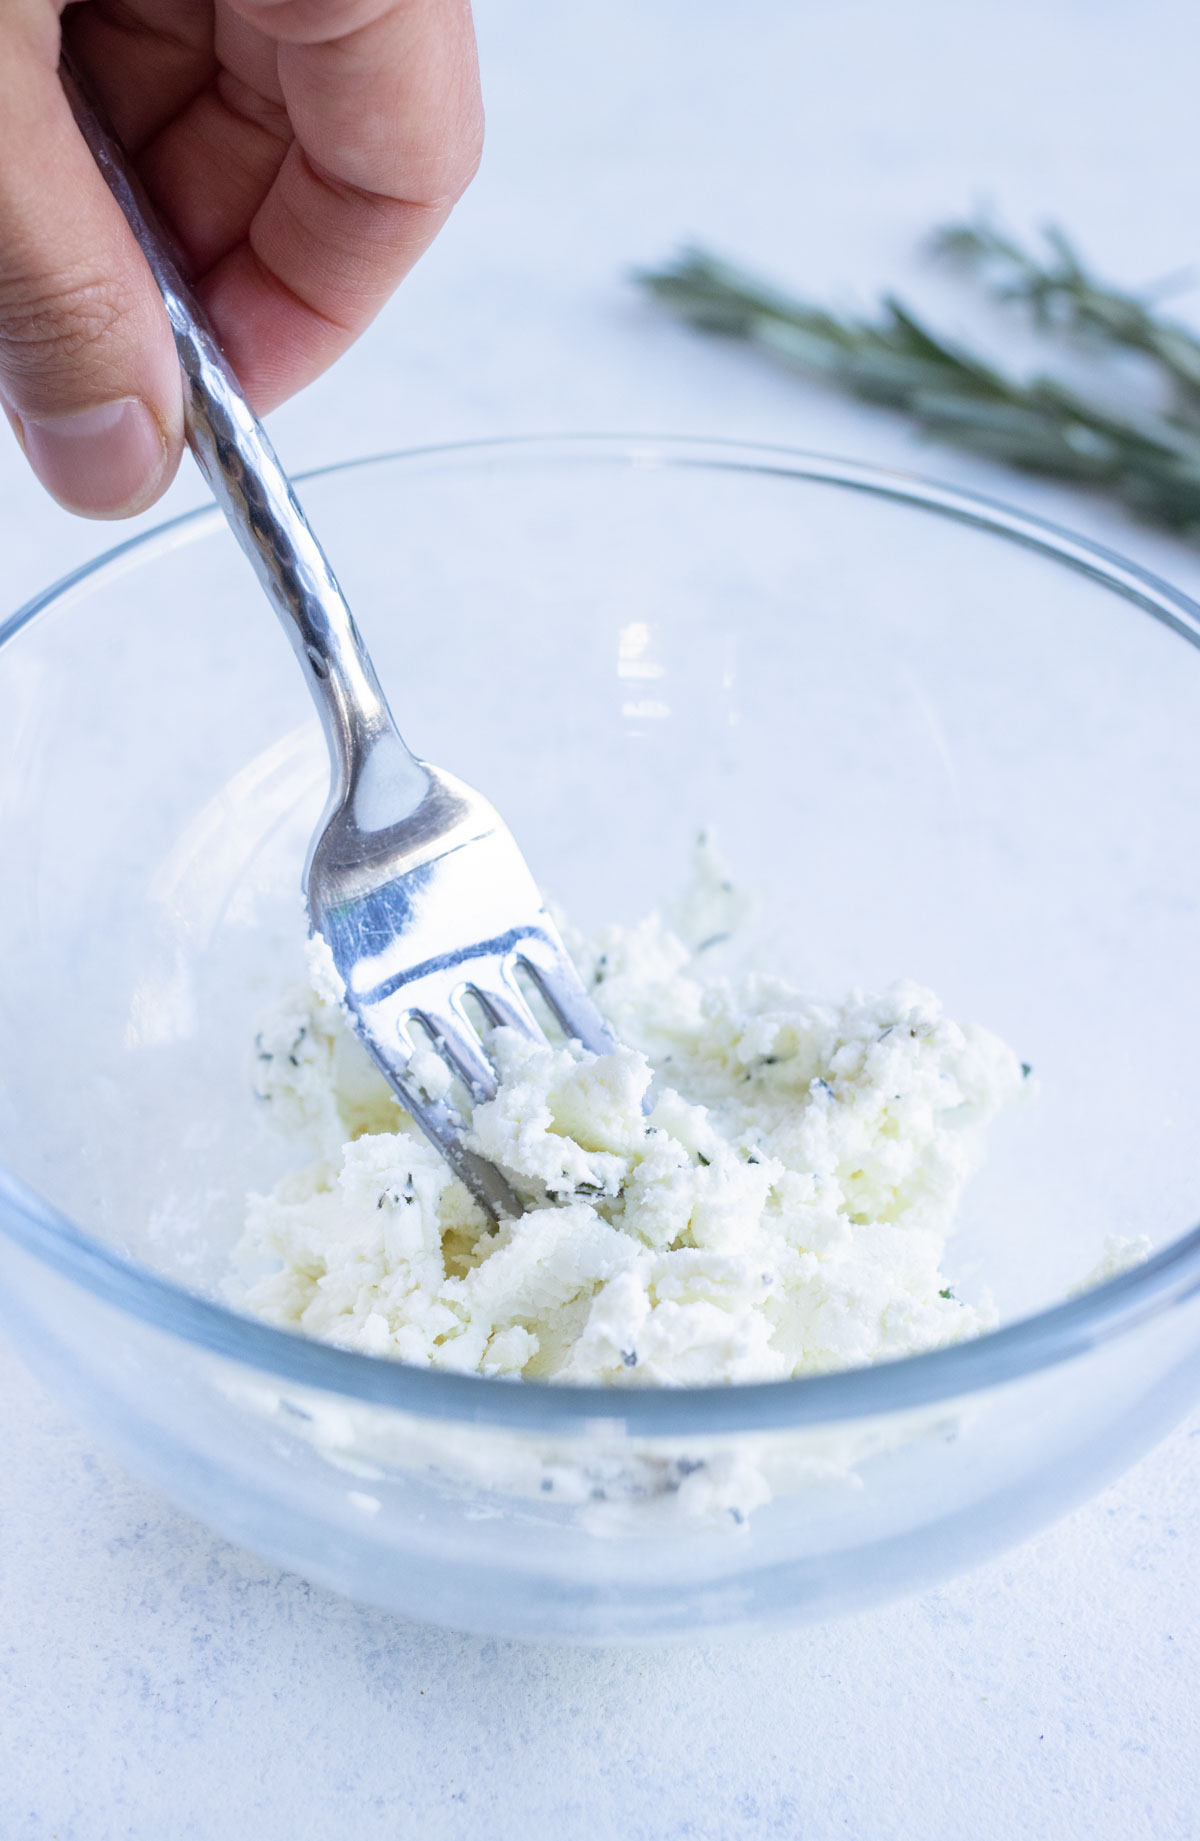 Goat cheese, salt, and herbs are mixed in a bowl.